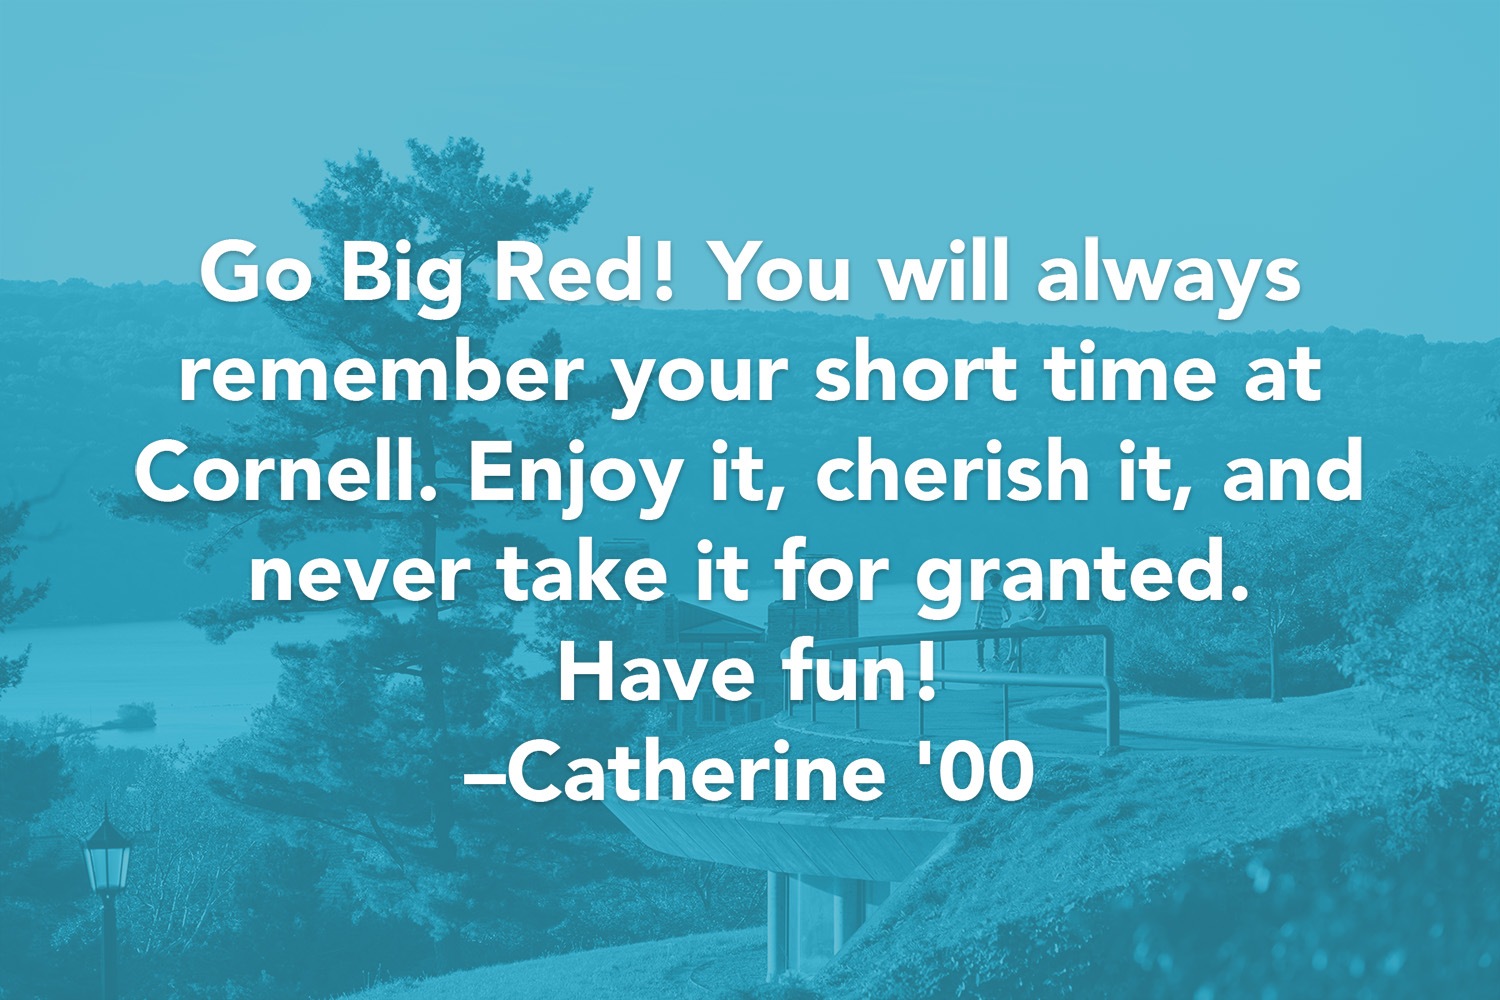 Quote: Go Big Red! You will always remember your short time at Cornell. Enjoy it, cherish it, and never take it for granted. Have fun! -Catherine '00